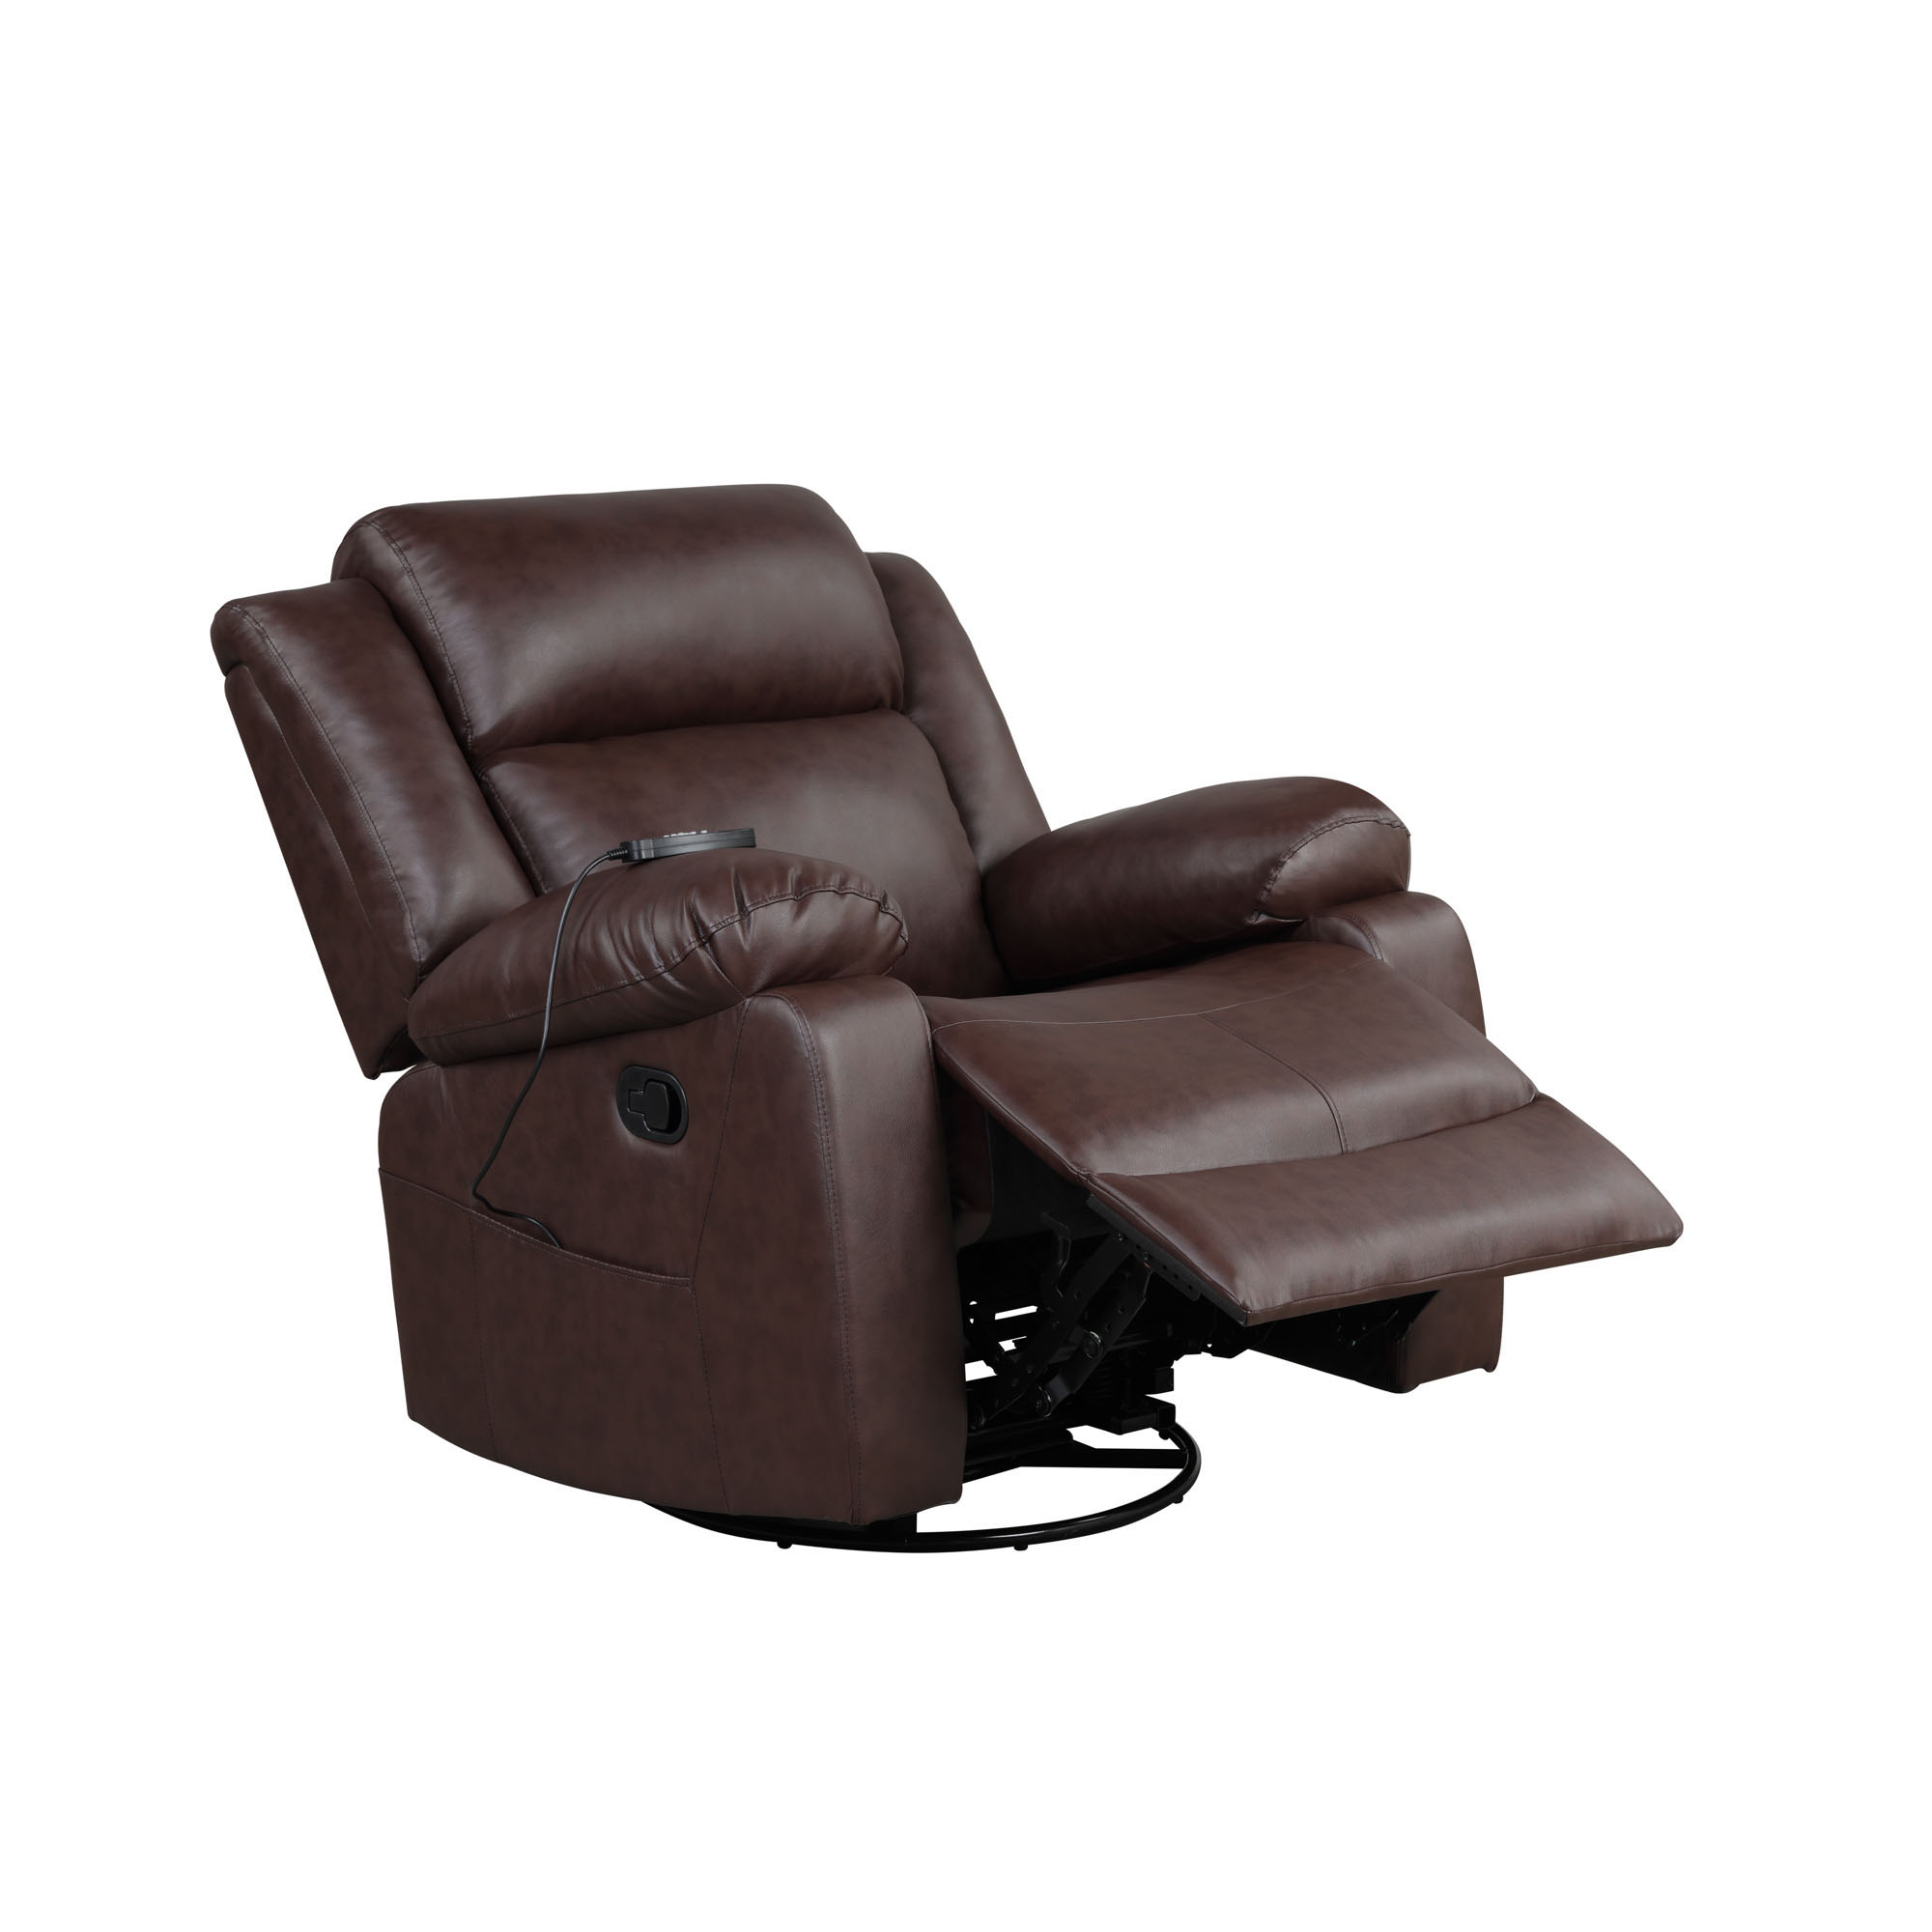 Elm & Oak Maxima Standard Manual Swivel Recliner with Massage and Heat, Brown Faux Leather - image 3 of 13